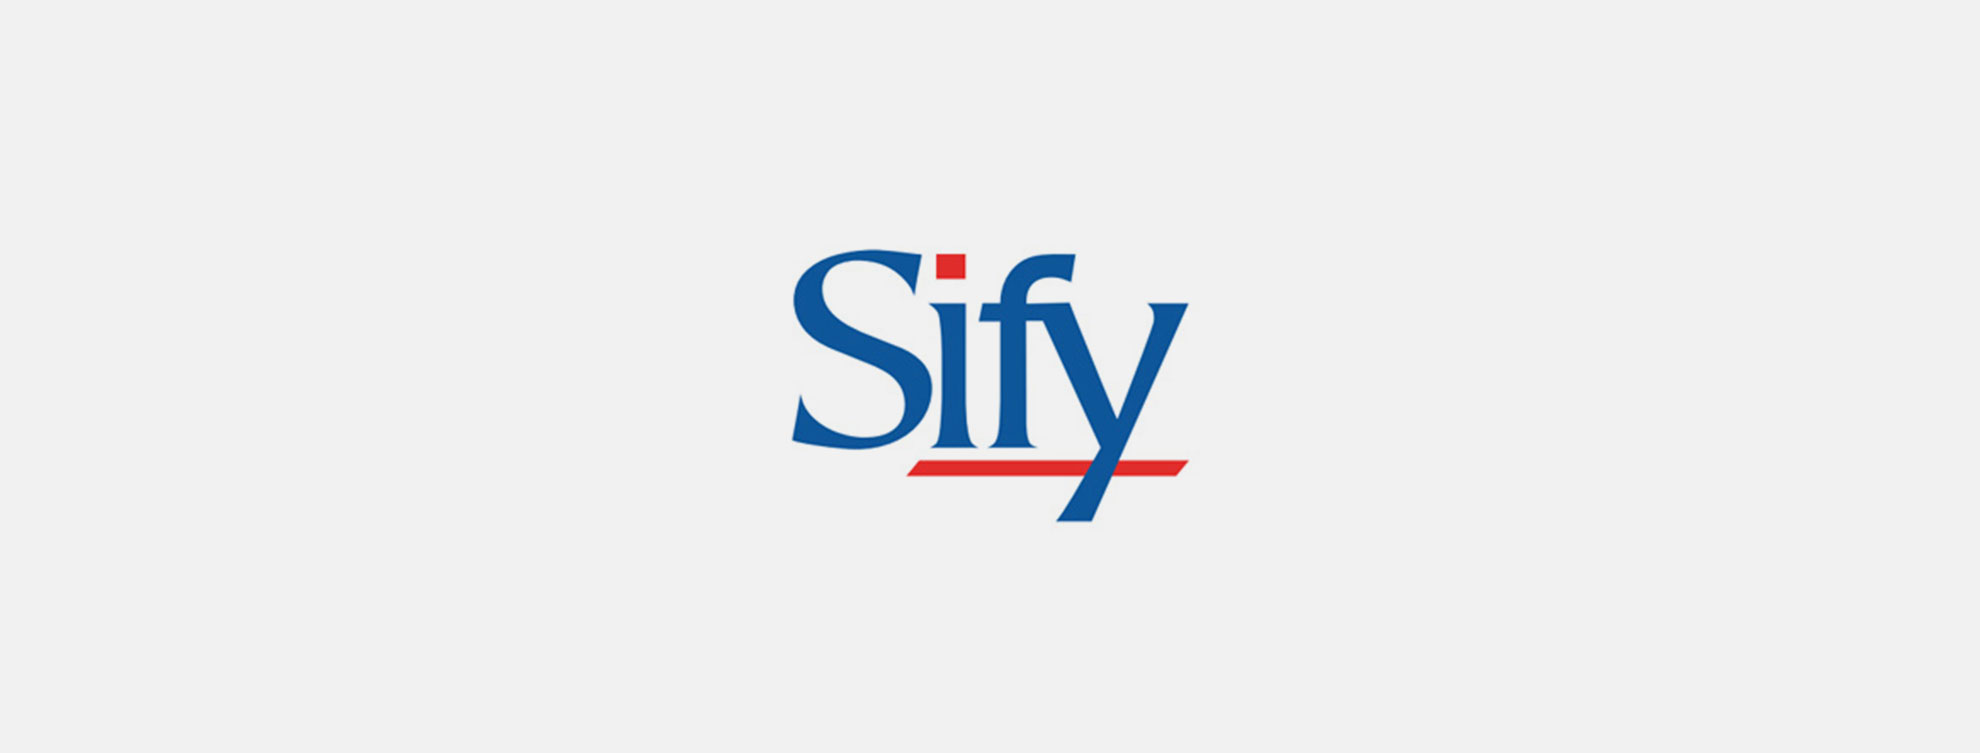 Sify-logo-old